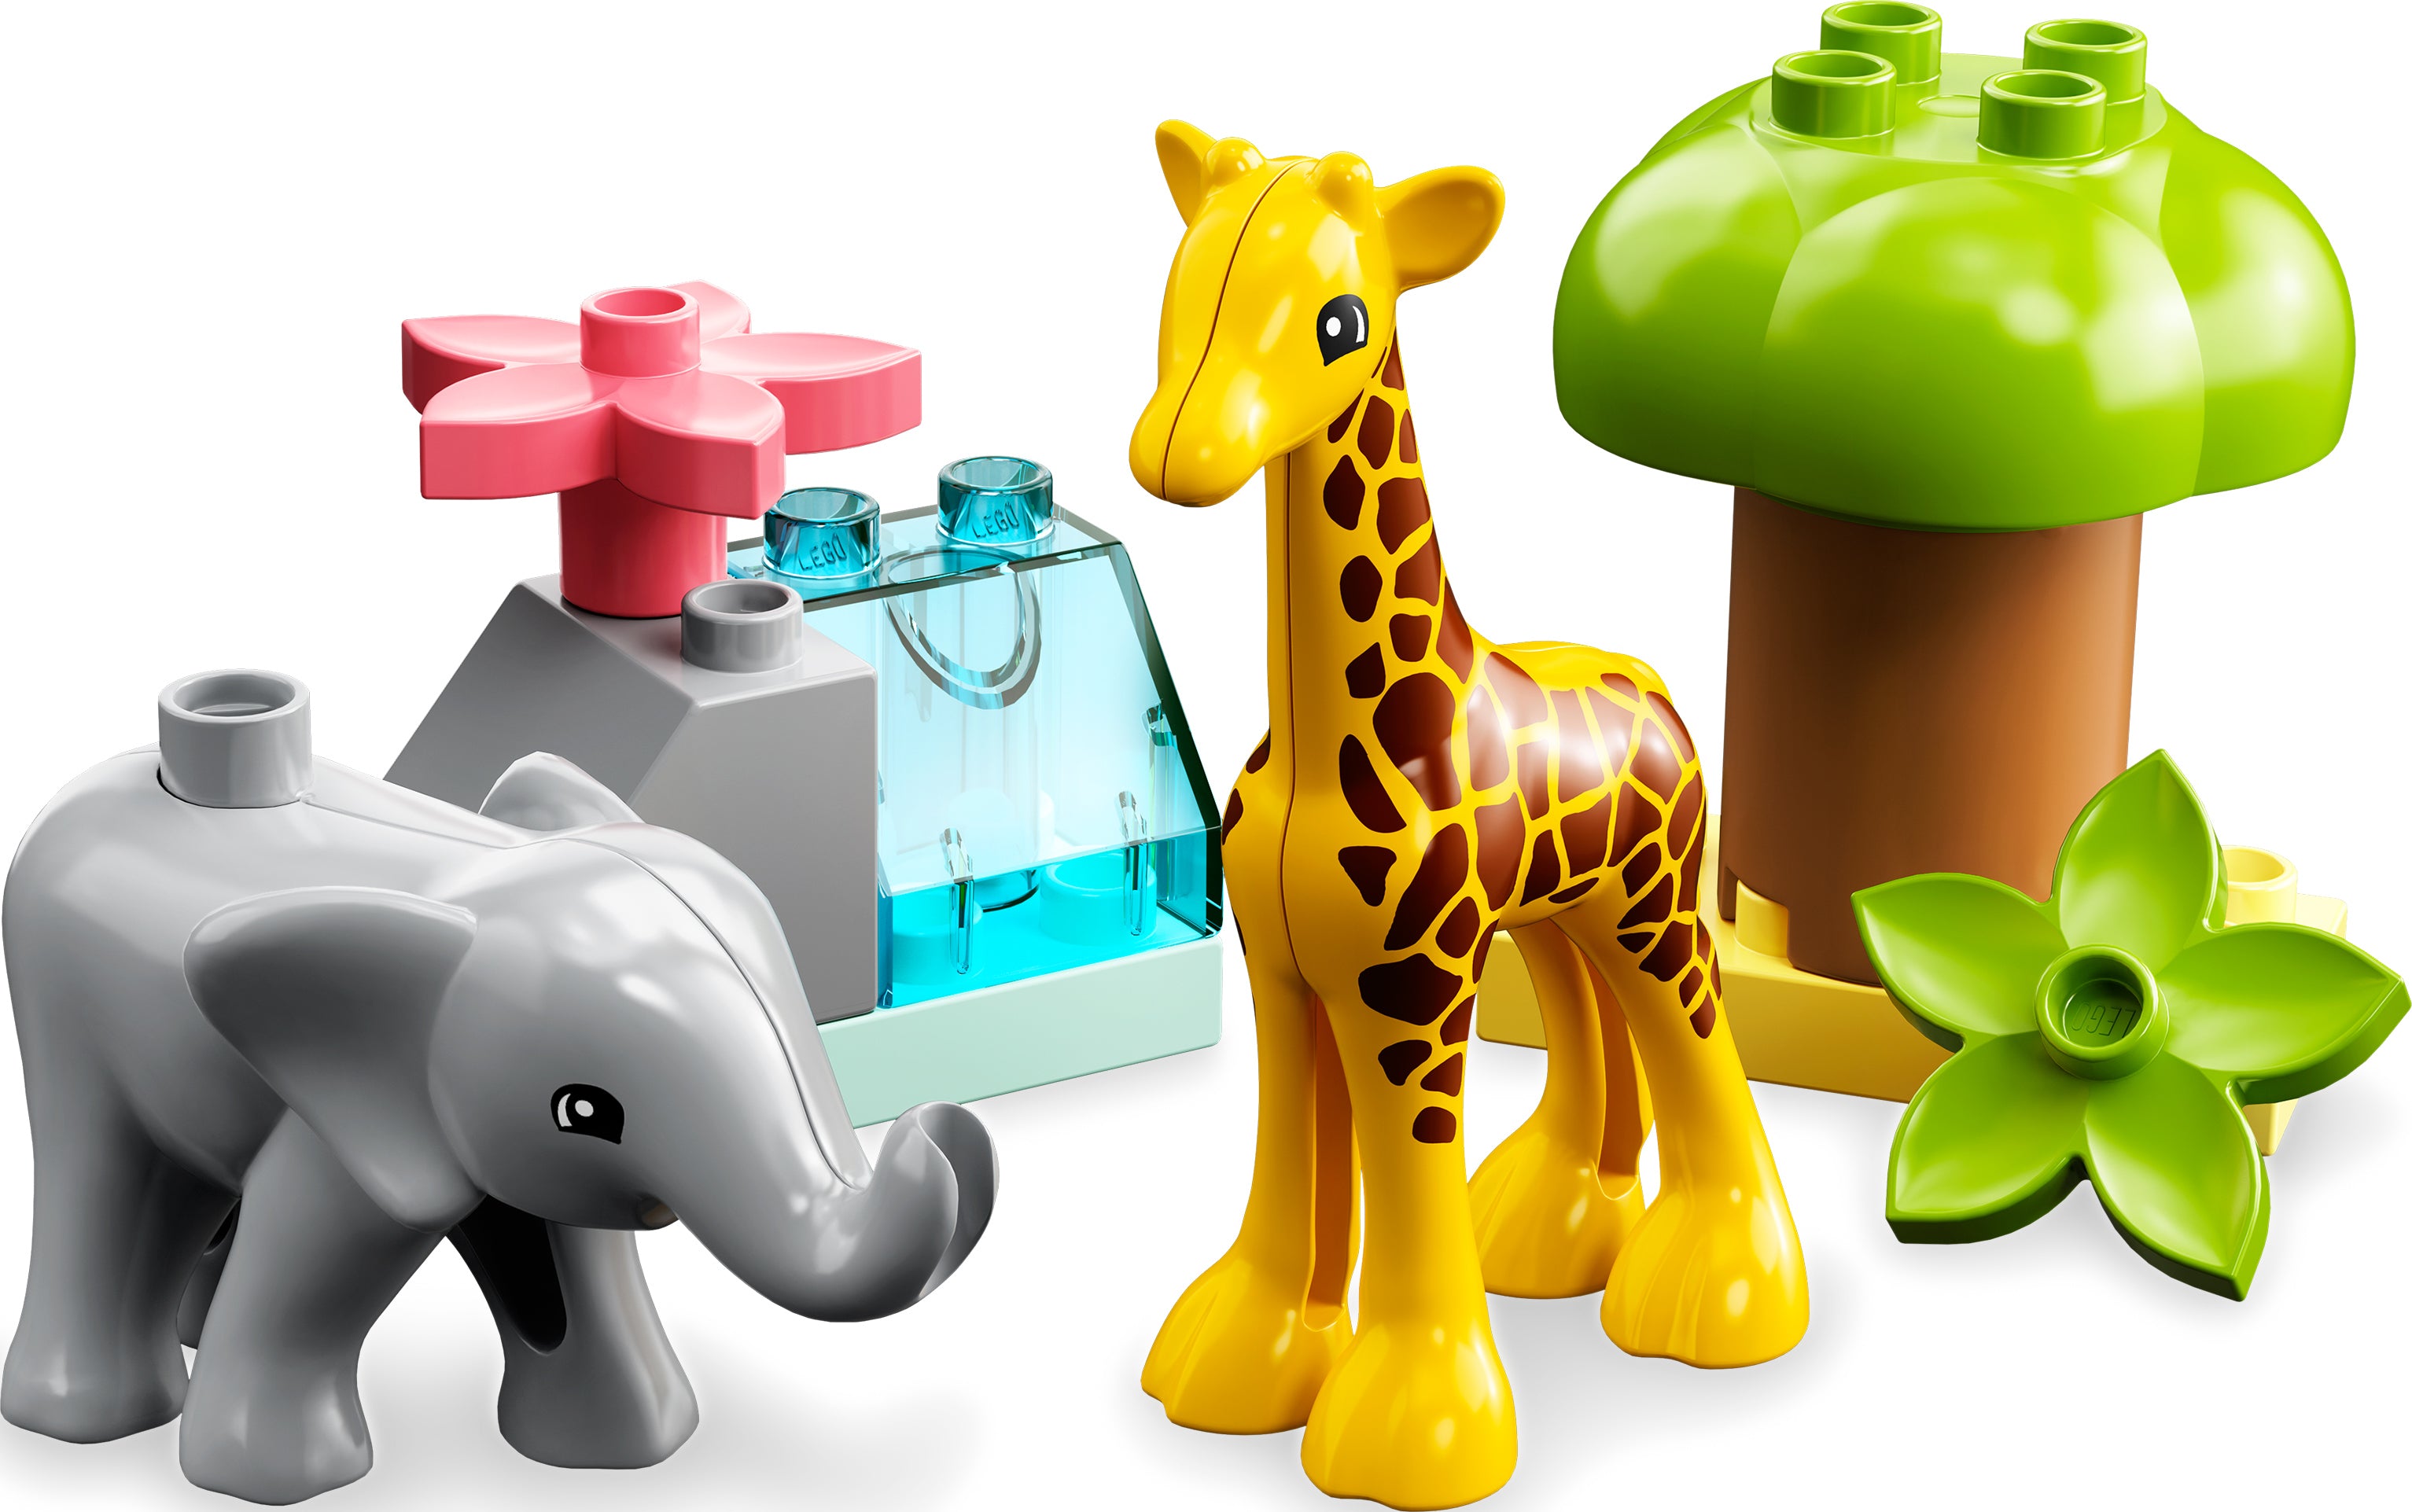 LEGO® Animal Toys and Figures